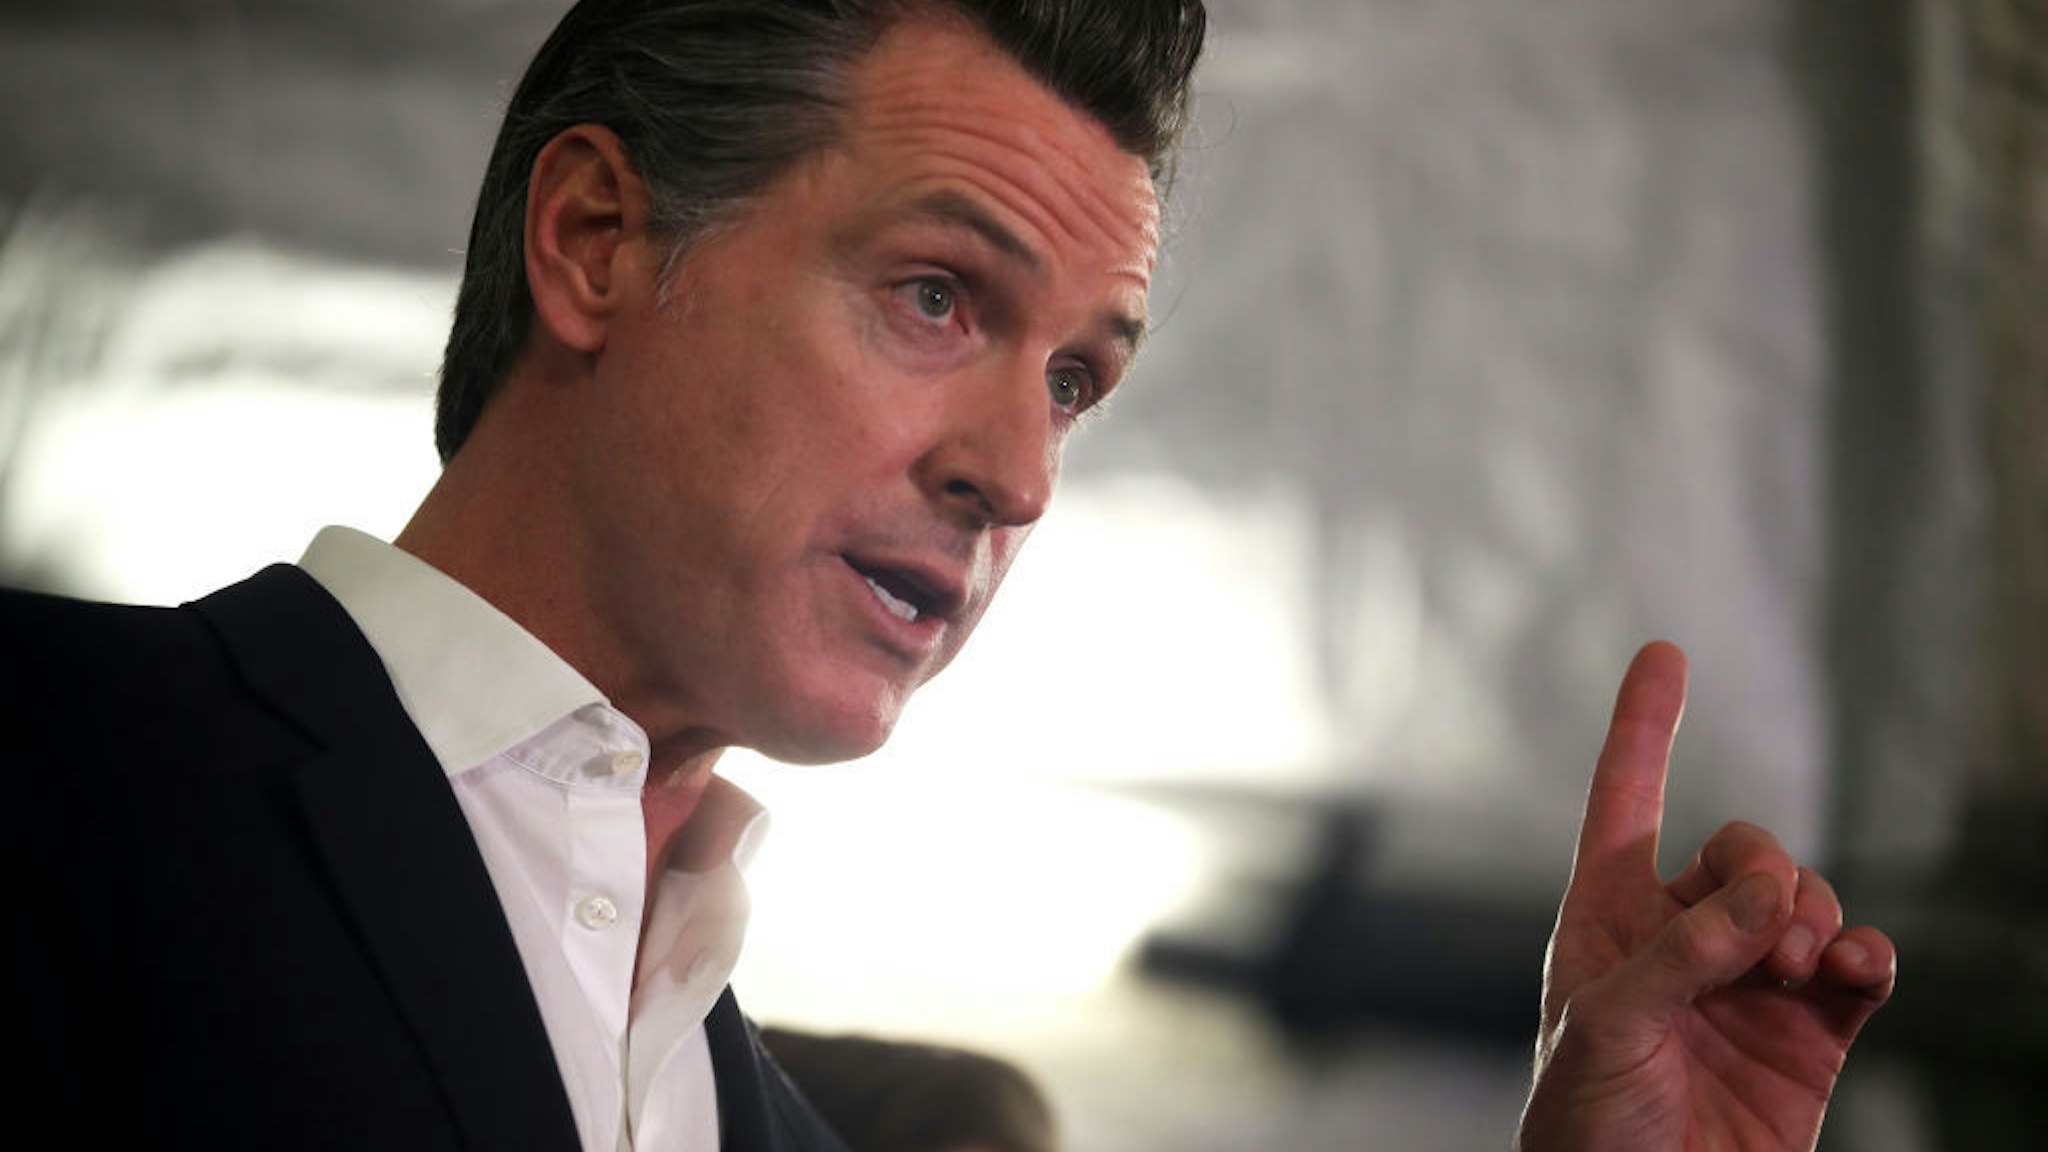 California Gov. Gavin Newsom speaks during a a news conference about the state's efforts on the homelessness crisis on January 16, 2020 in Oakland, California. Newsom was joined by Oakland Mayor Libby Schaaf to announce that Oakland will receive 15 unused FEMA trailers for the city to use as temporary housing and as mobile health and social services clinics for the homeless. Newsom signed on executive order on January 8 to deploy 100 trailers and crisis response teams to areas in need across the state. (Photo by Justin Sullivan/Getty Images)